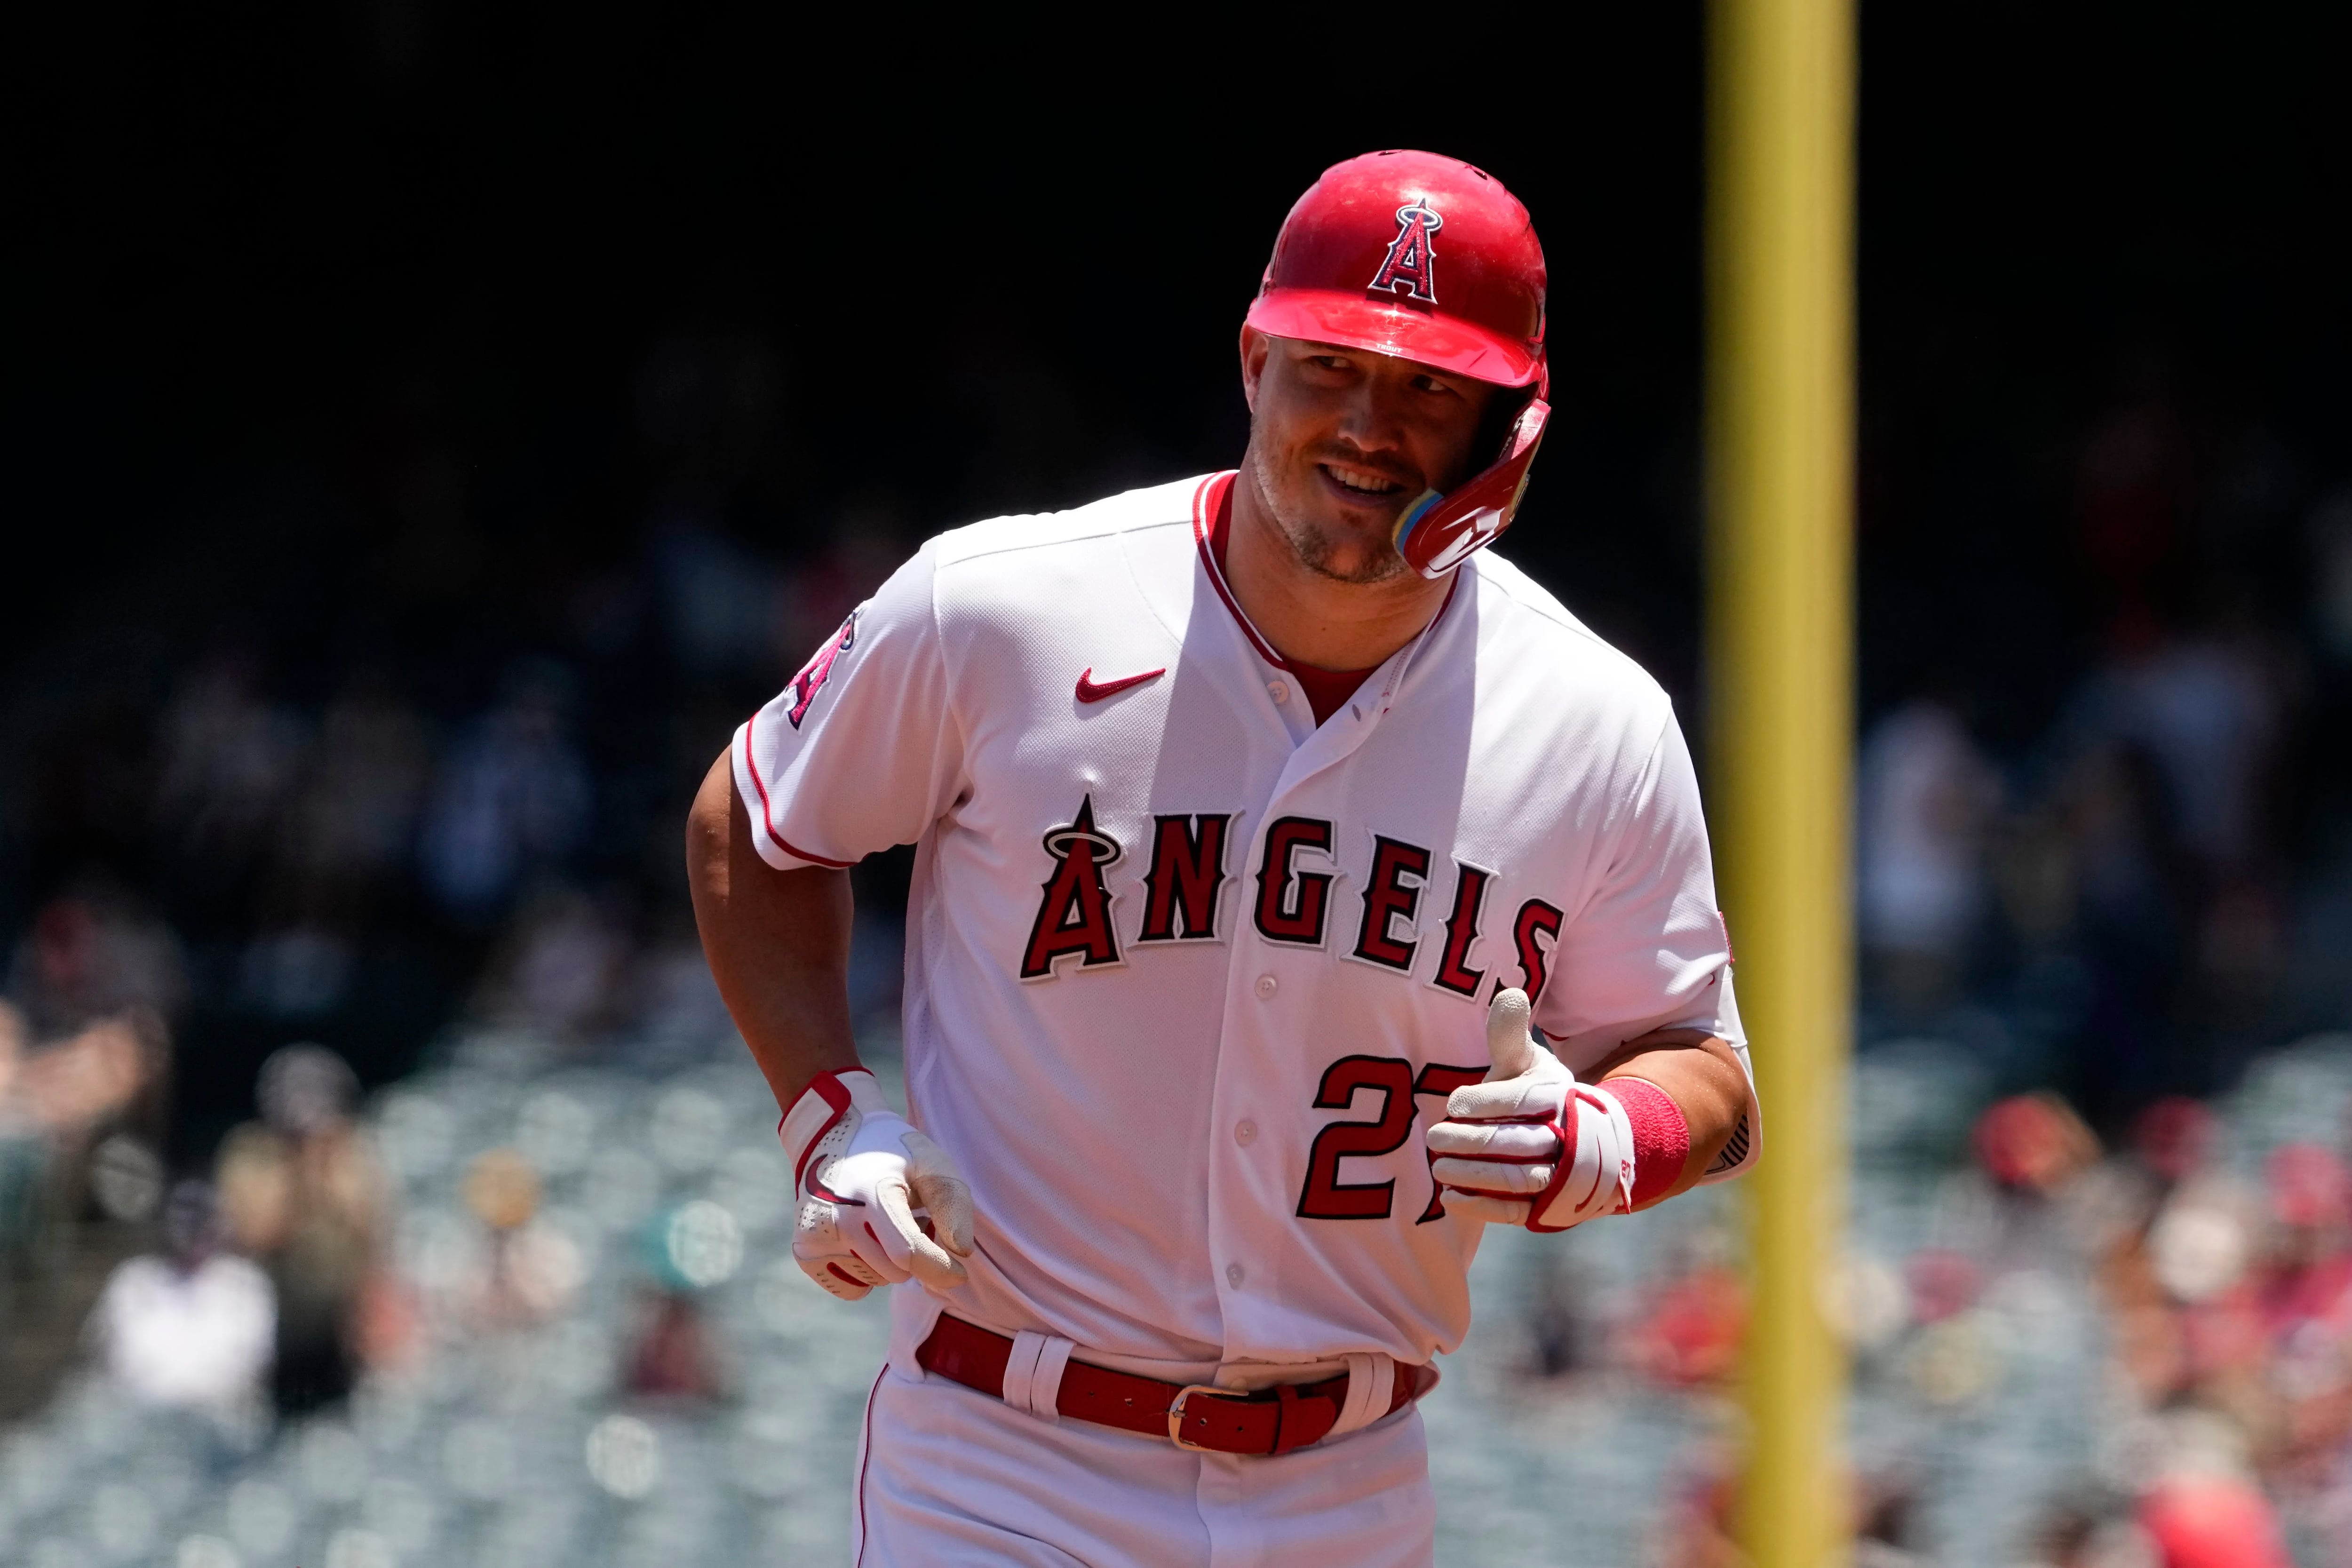 Mike Trout has seven years at $37.1 million per year left on his contract with the Angels.
